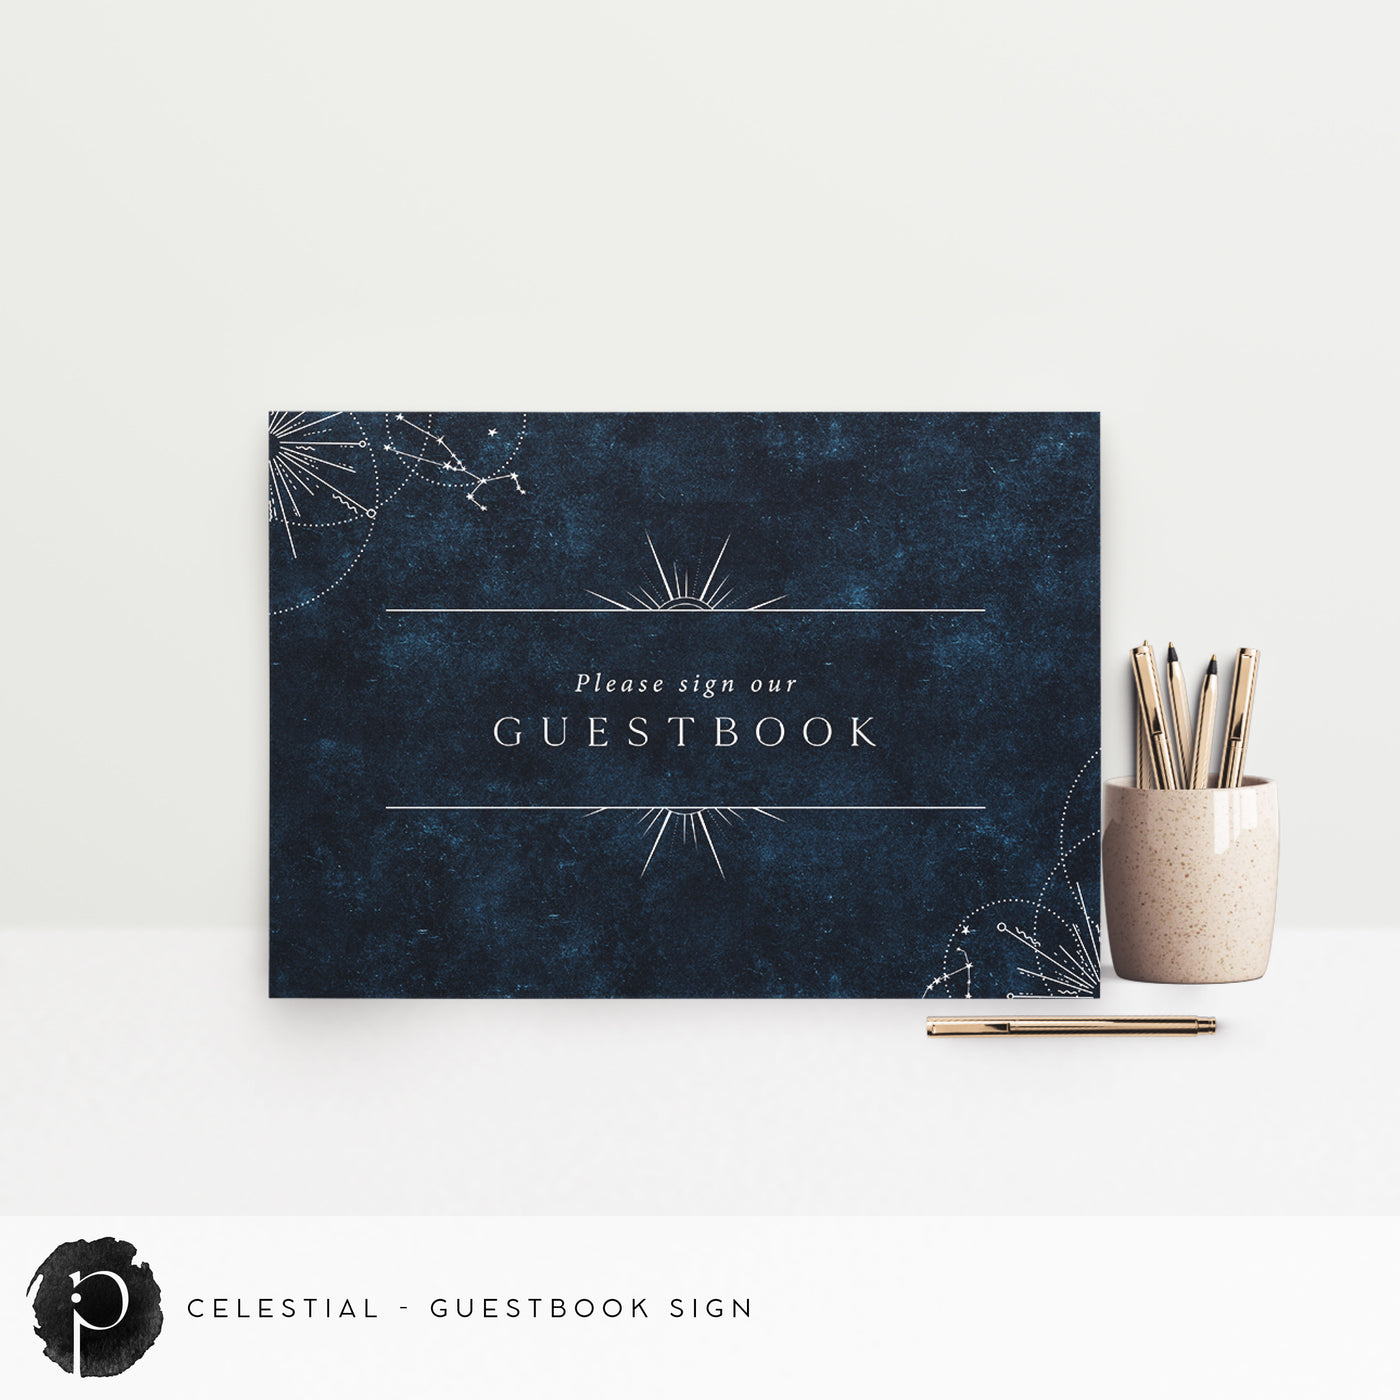 Celestial - Guestbook Sign